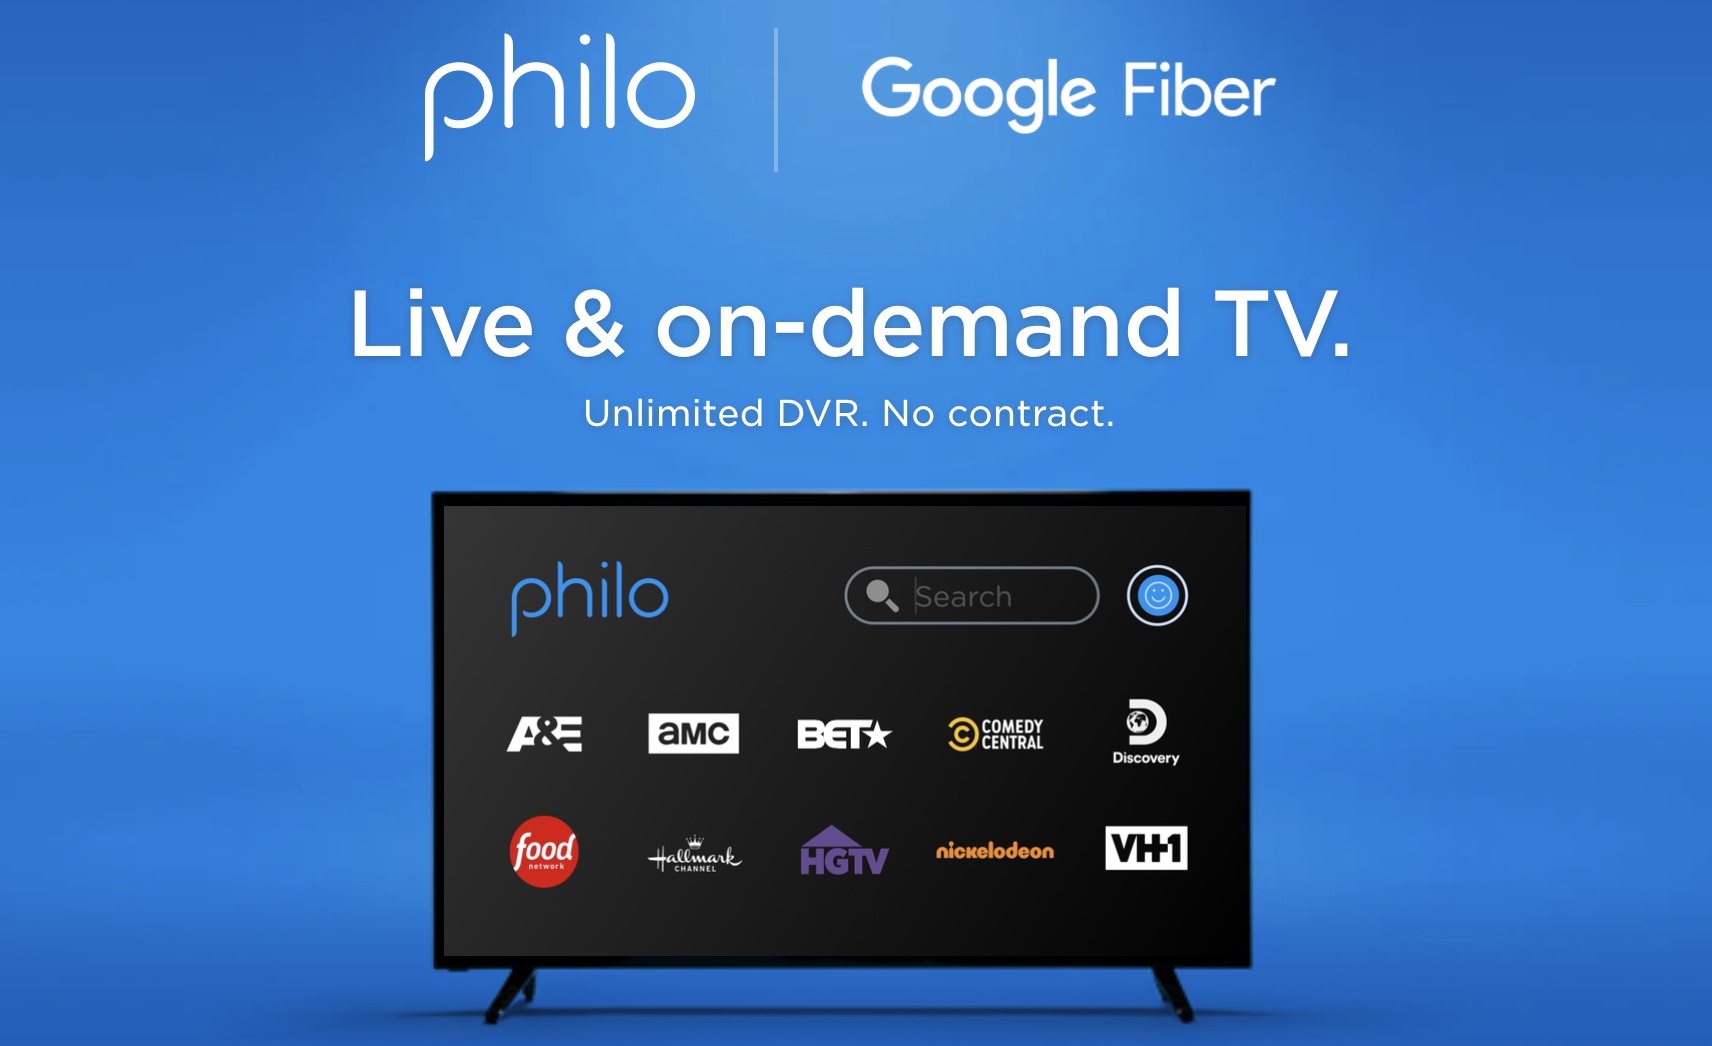 Google Fiber Adds Philo Streaming As An Option Next To Youtube And Fubo Wilson S Media - roblox first day of kindergarten sign august 2018 chalkboard